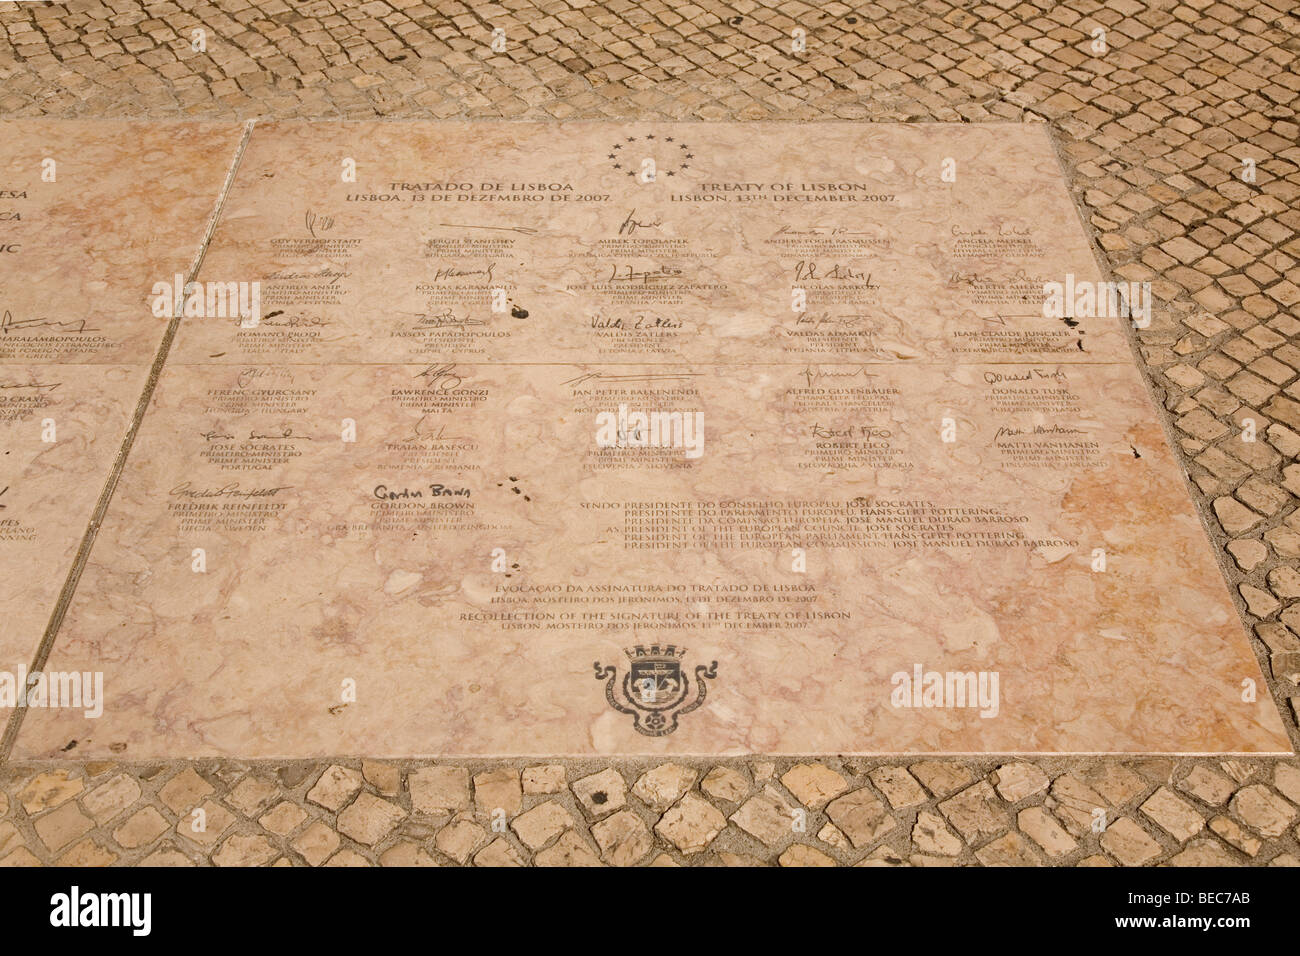 A memorial to the Lisbon Treaty of 13th December 2007. The names of the signatories can be seen on the memorial. Stock Photo